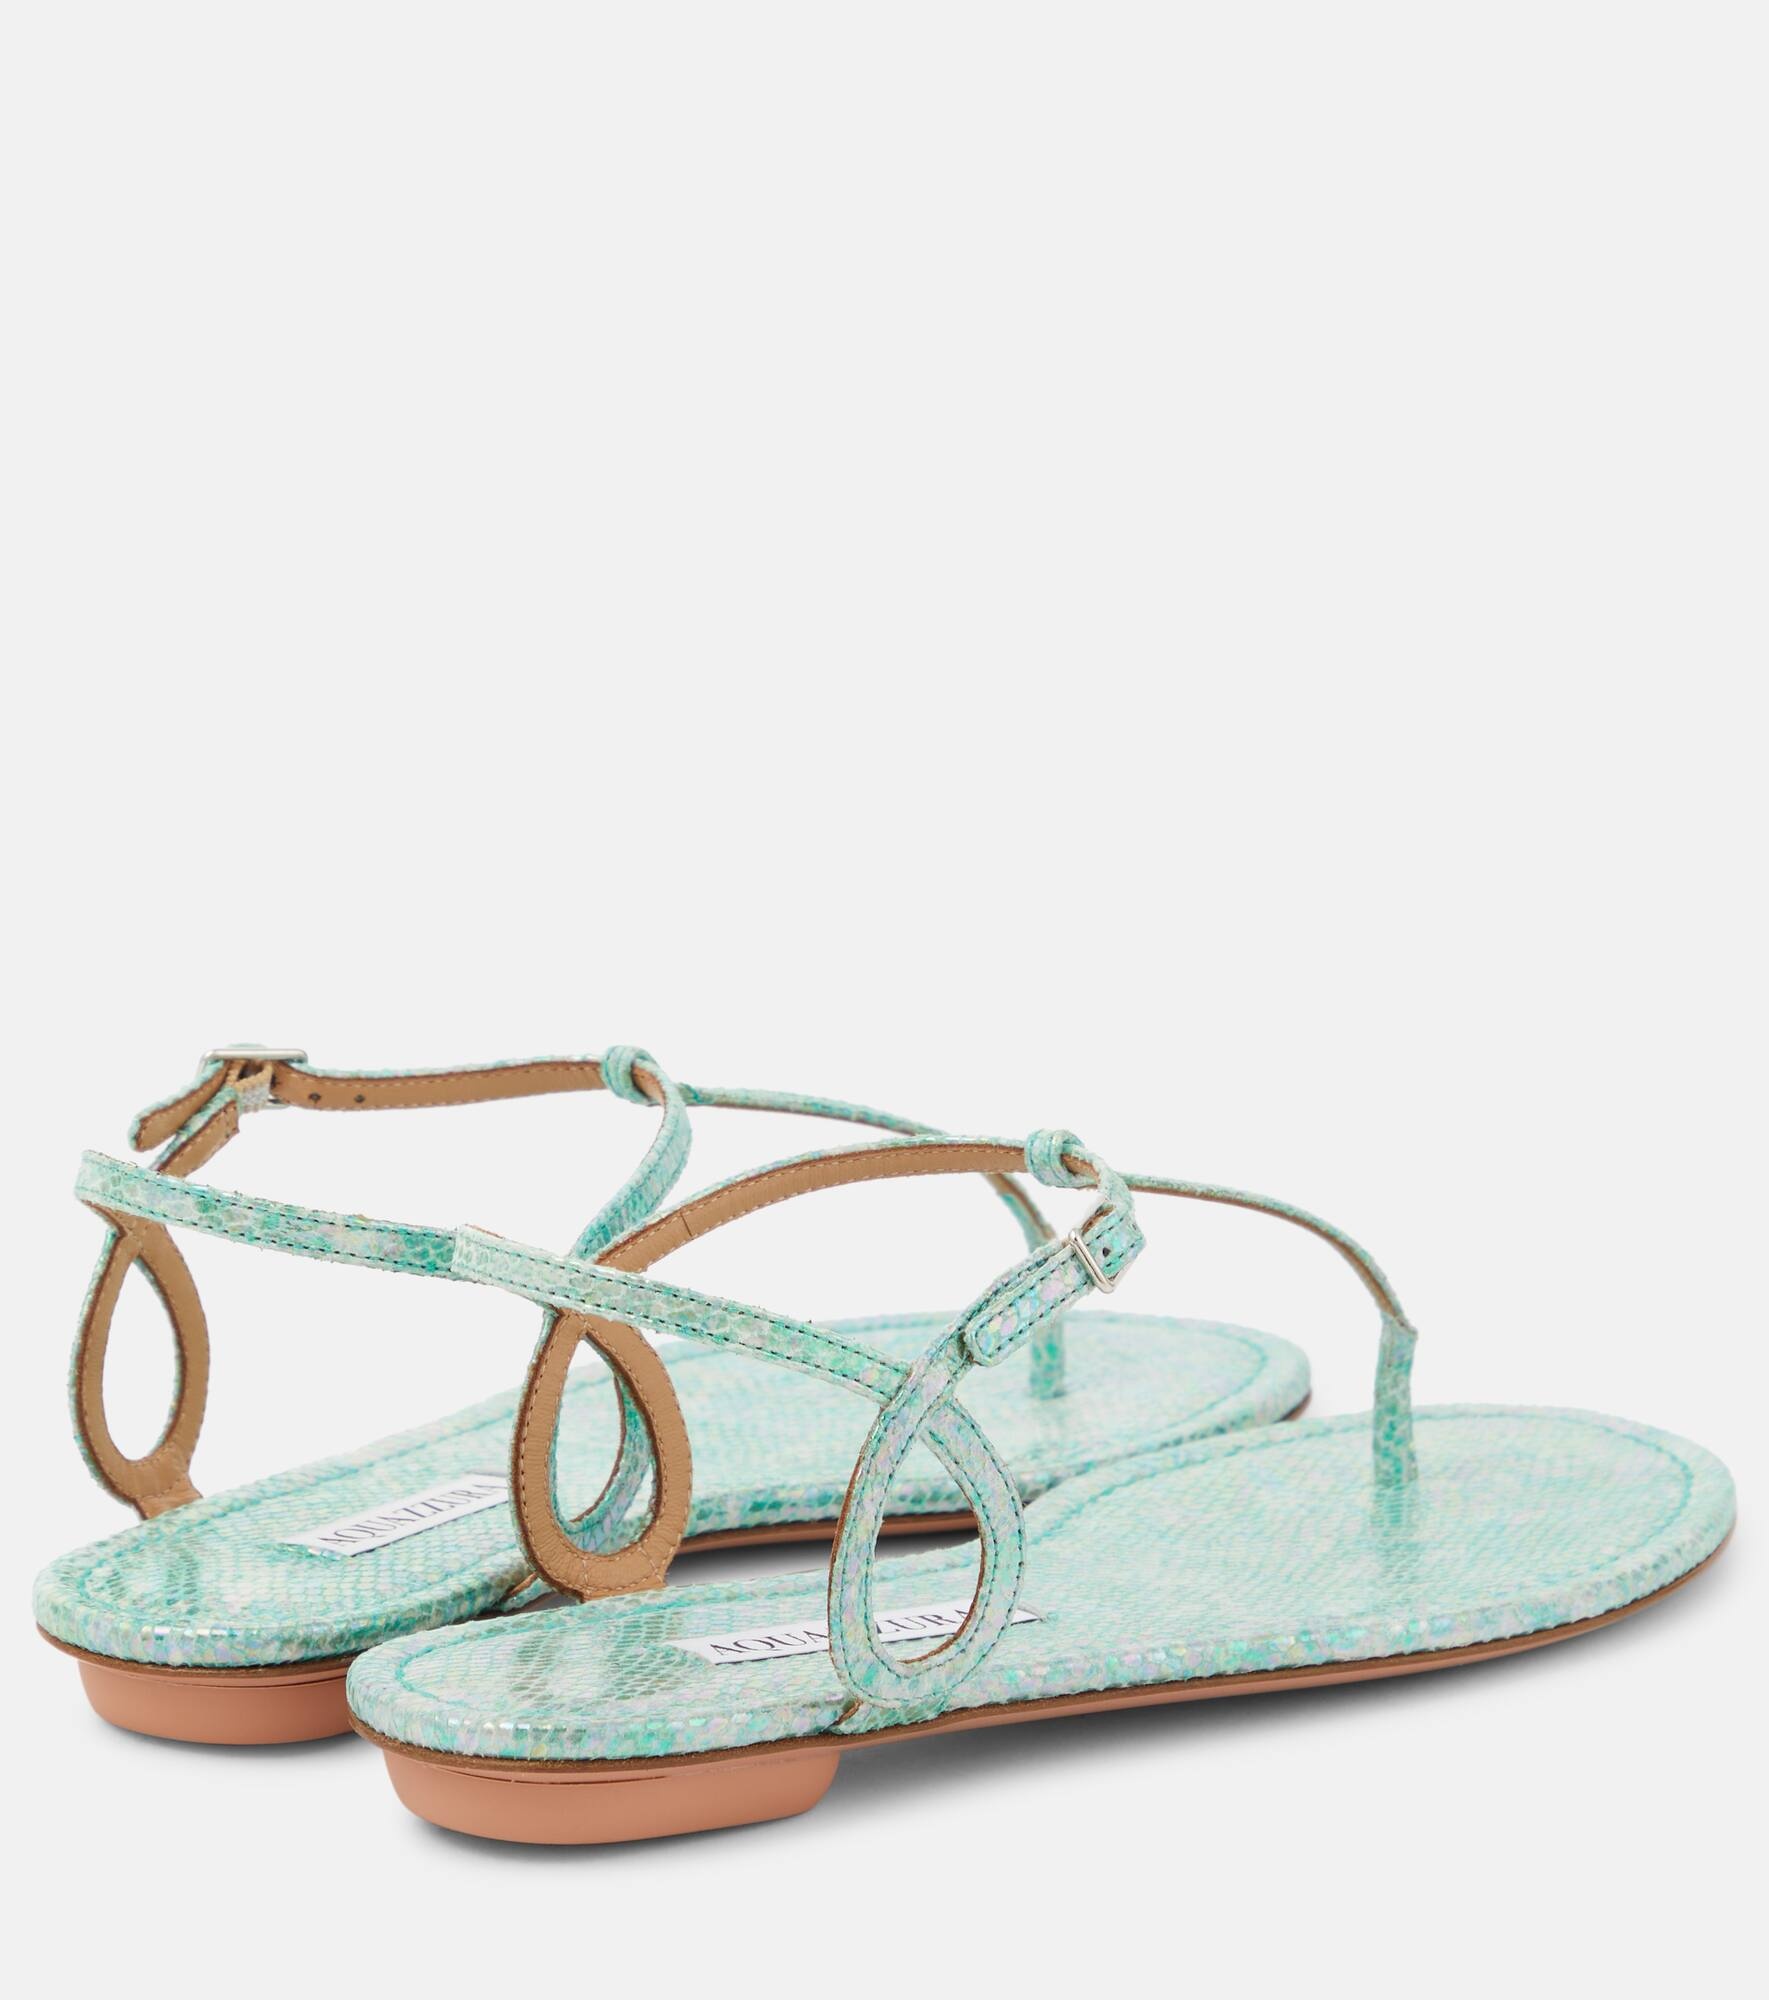 Almost Bare leather thong sandals - 3